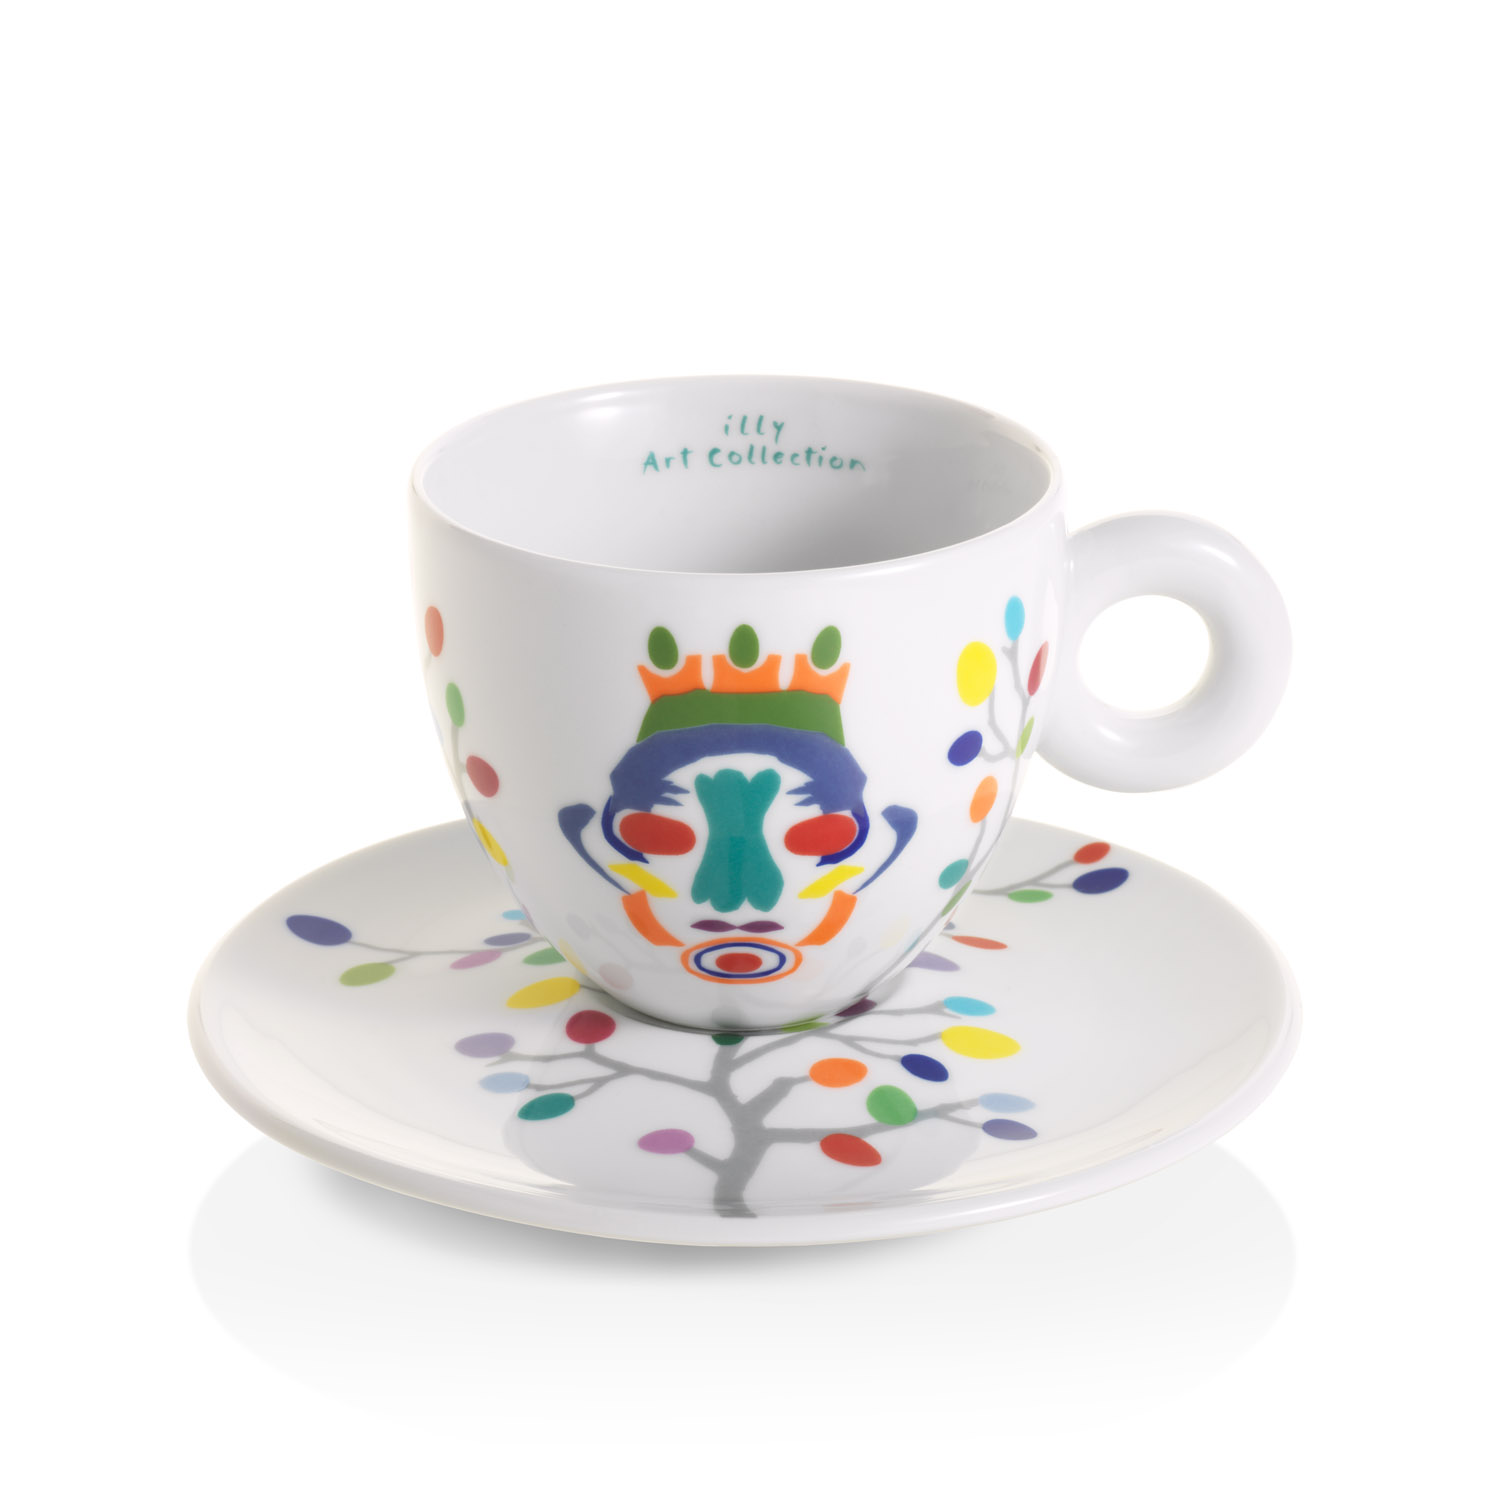 illy Art Collection PASCALE MARTHINE TAYOU Gift Set 6 Cappuccino Cups, Cups, 02-02-6091